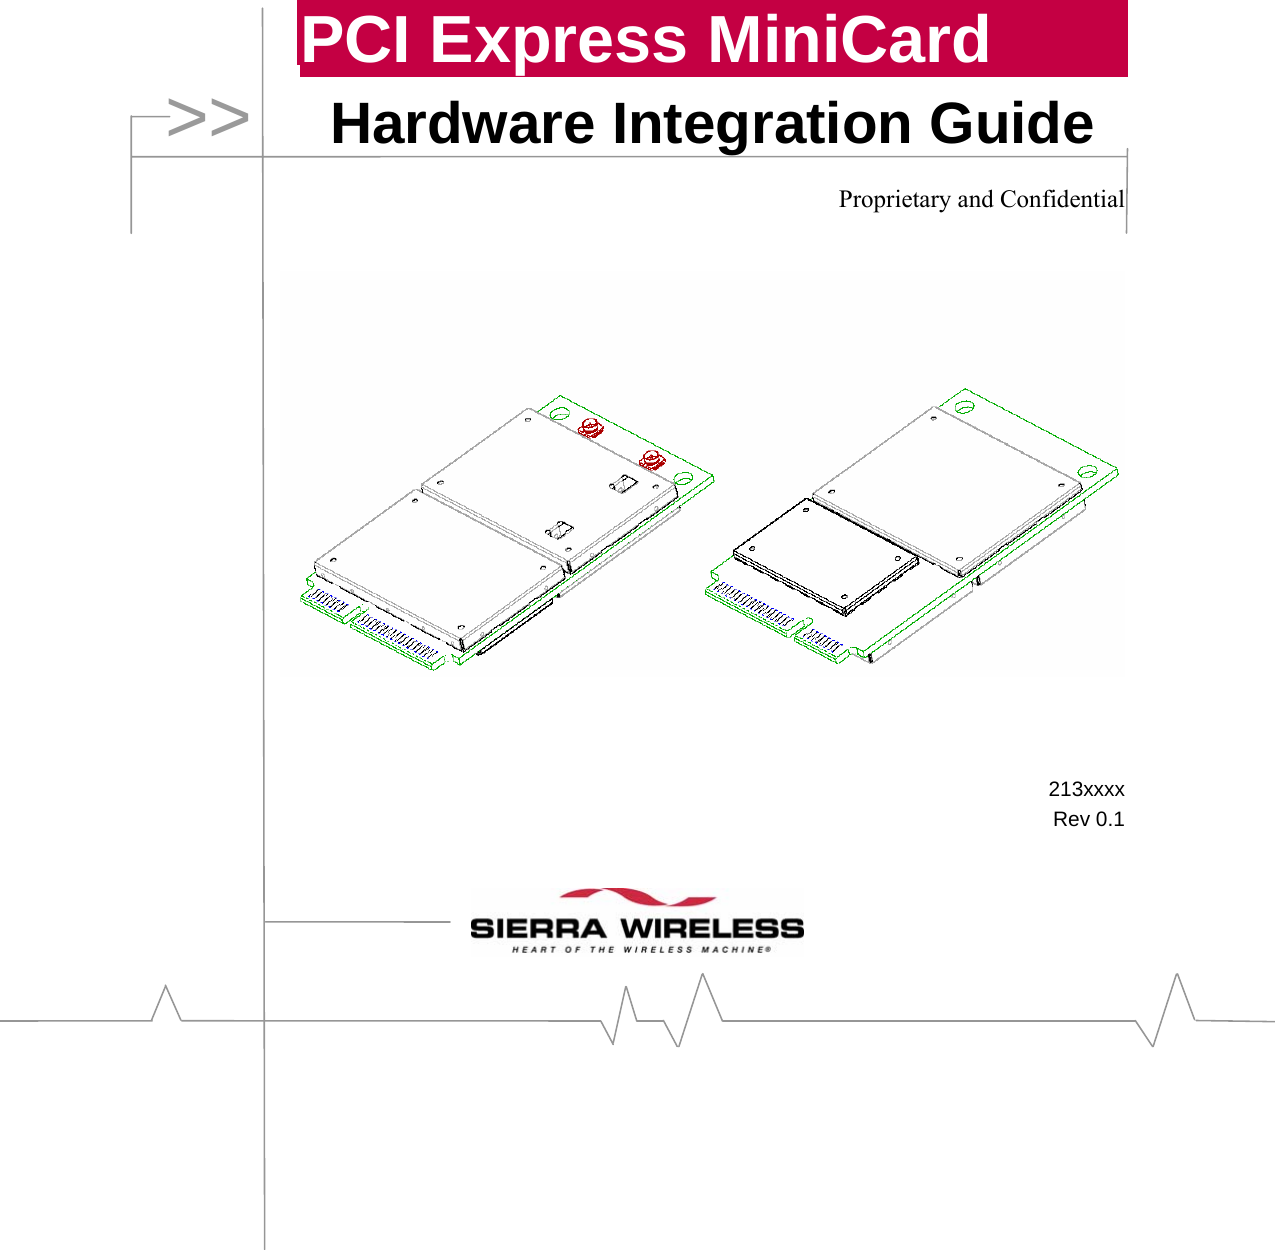     PCI Express MiniCard Hardware Integration Guide  Proprietary and Confidential           213xxxx Rev 0.1    &gt;&gt; 